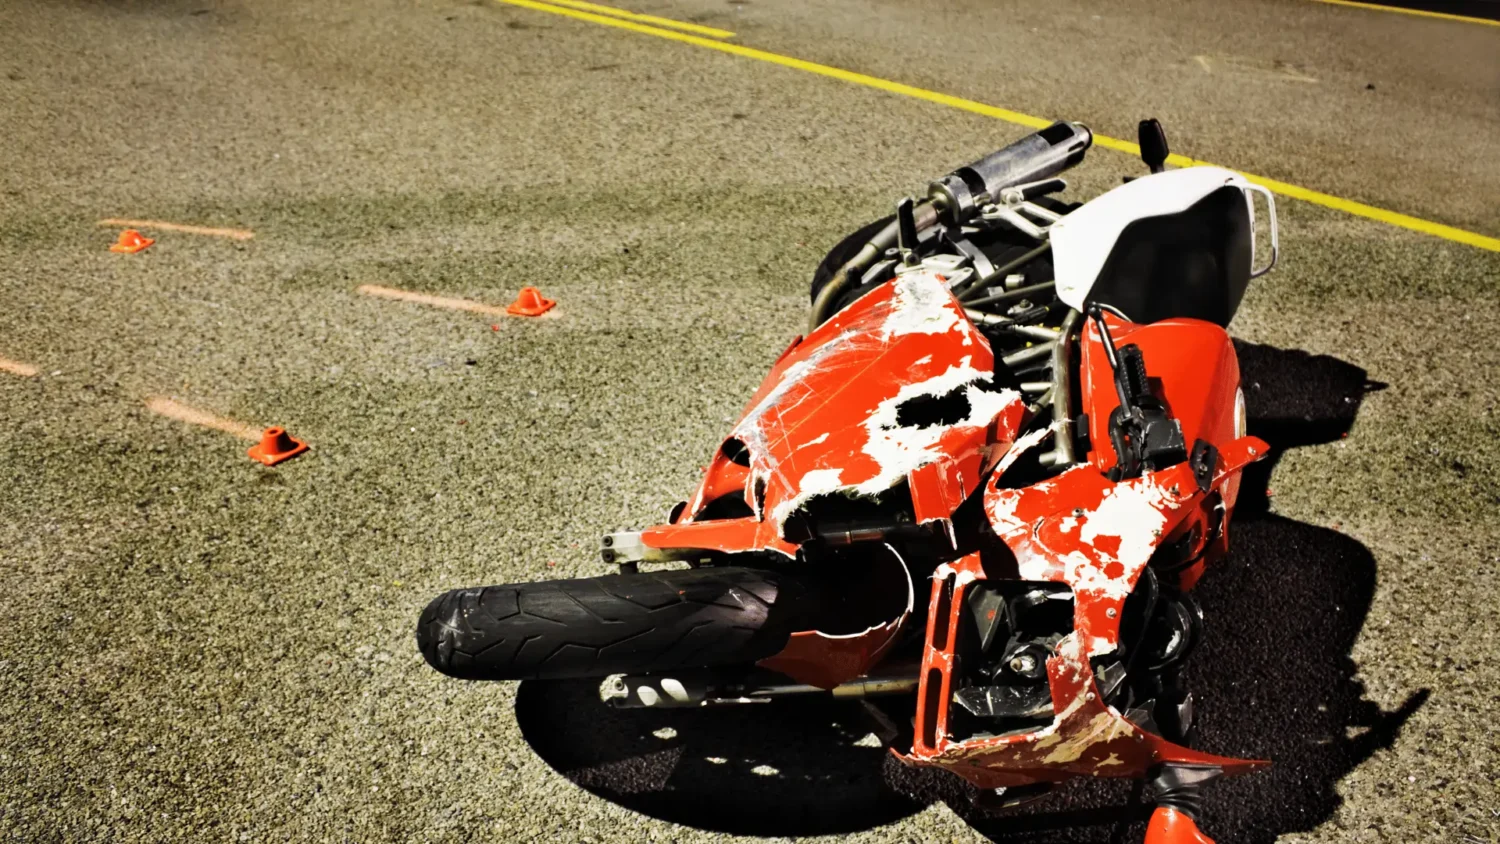 A List of Motorcycle Injuries